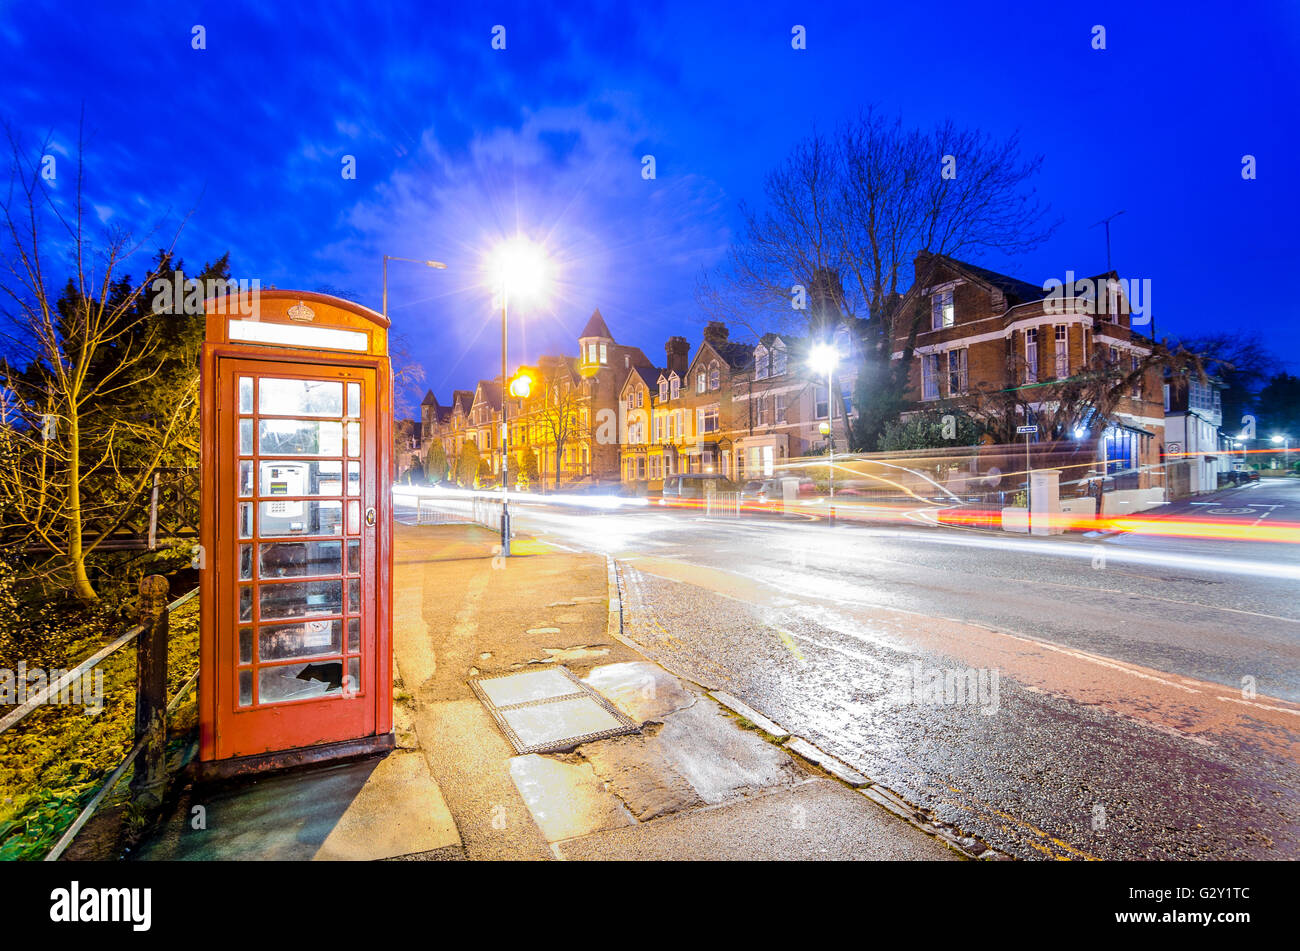 Night scene in Cambridge, UK, with red telephone box and motion blur light trails Stock Photo